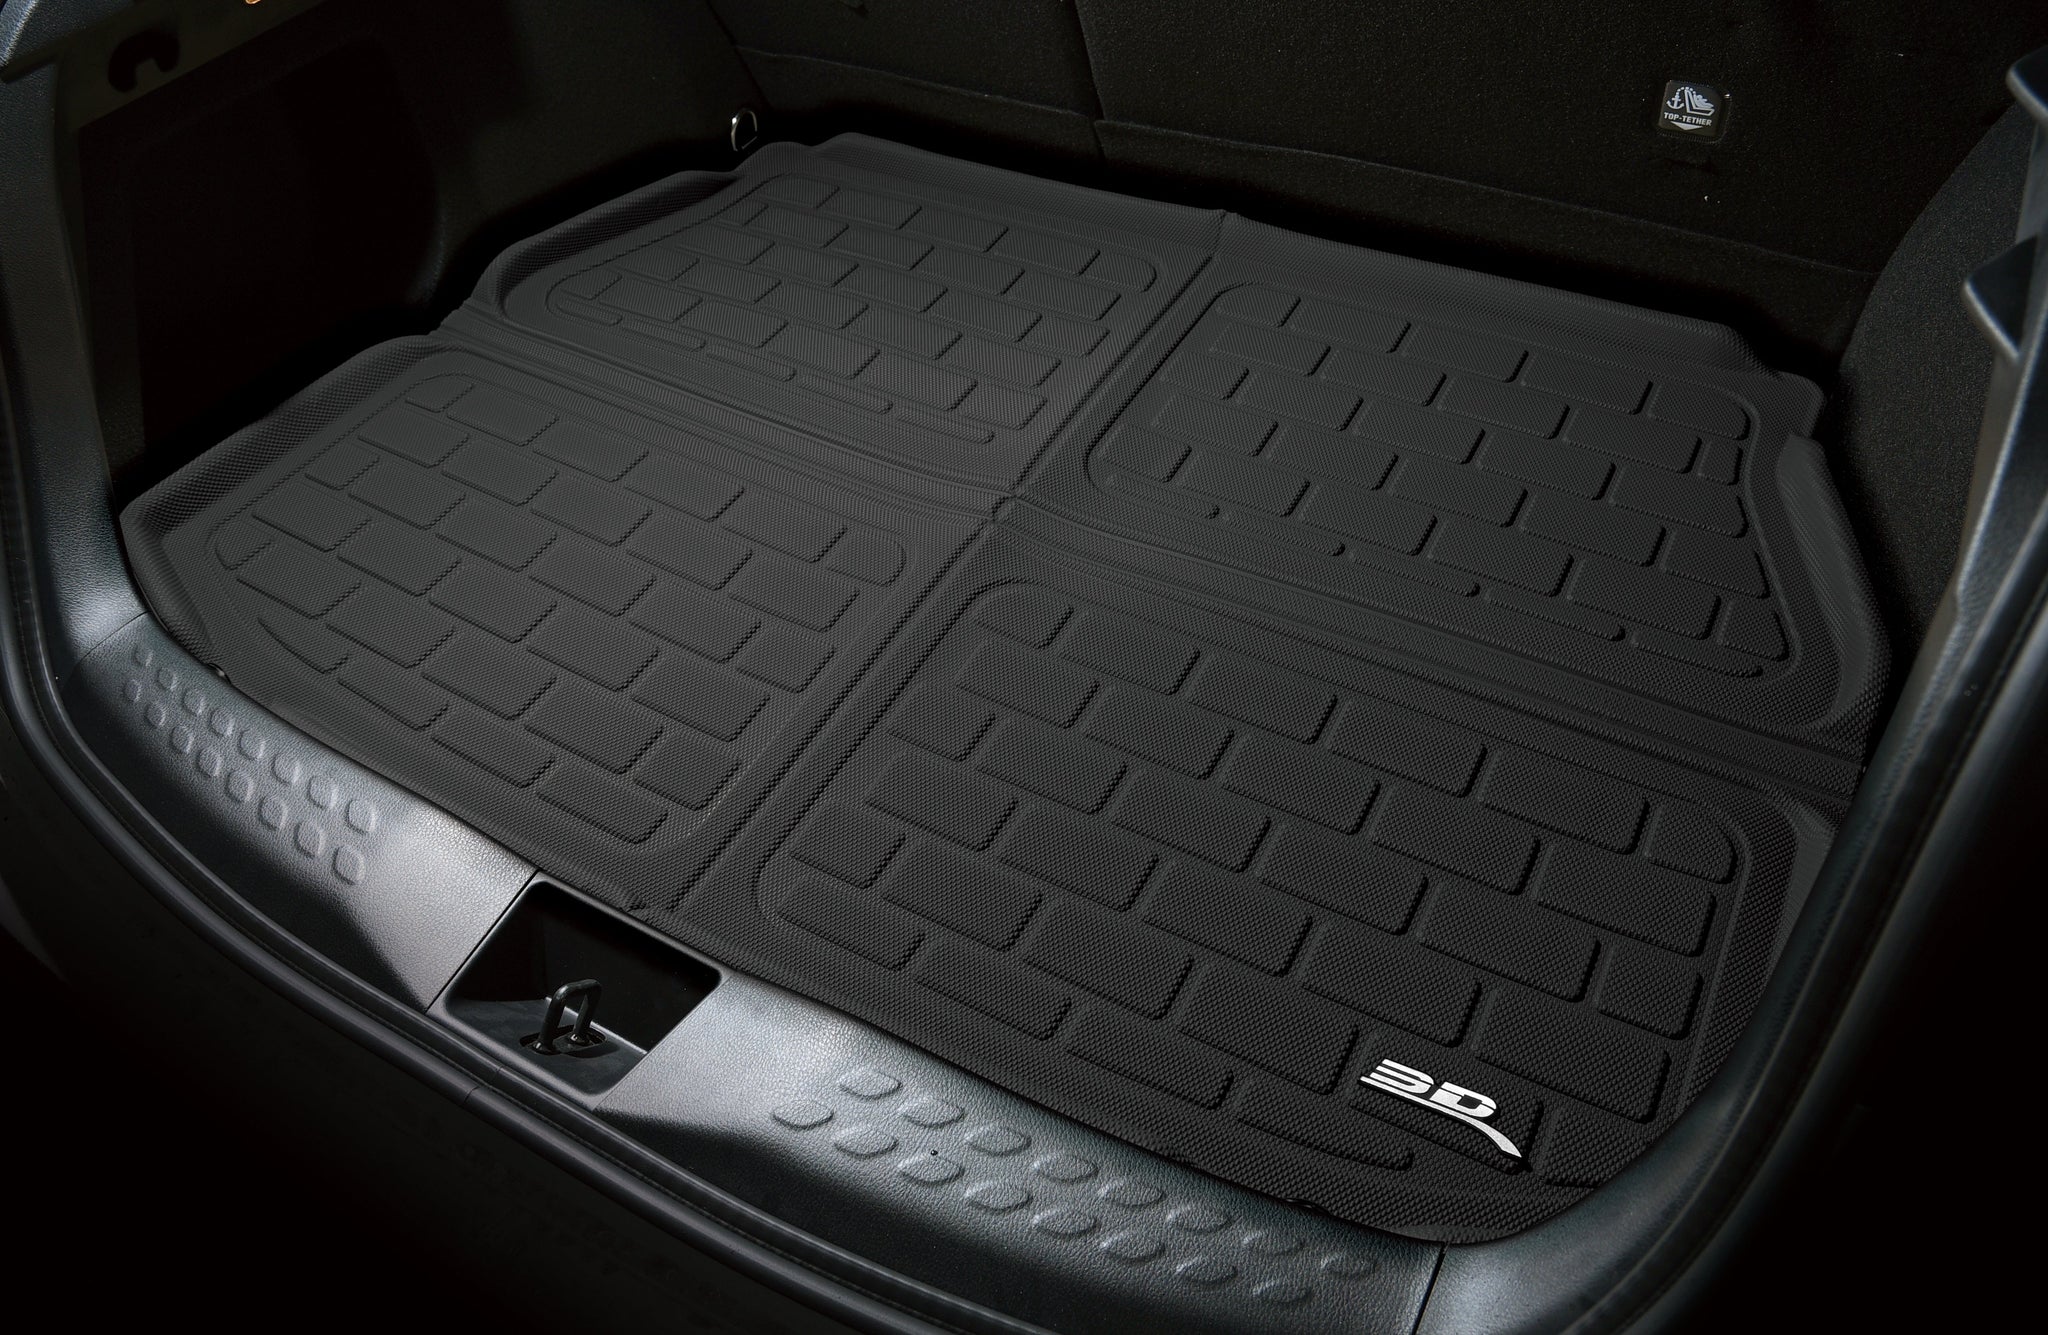 3D MAXpider Rubber Cargo Liner for 2020-2021 Tesla Model Y – Black Custom Fit All-Weather Kagu Series (NOT FIT 7-SEAT)